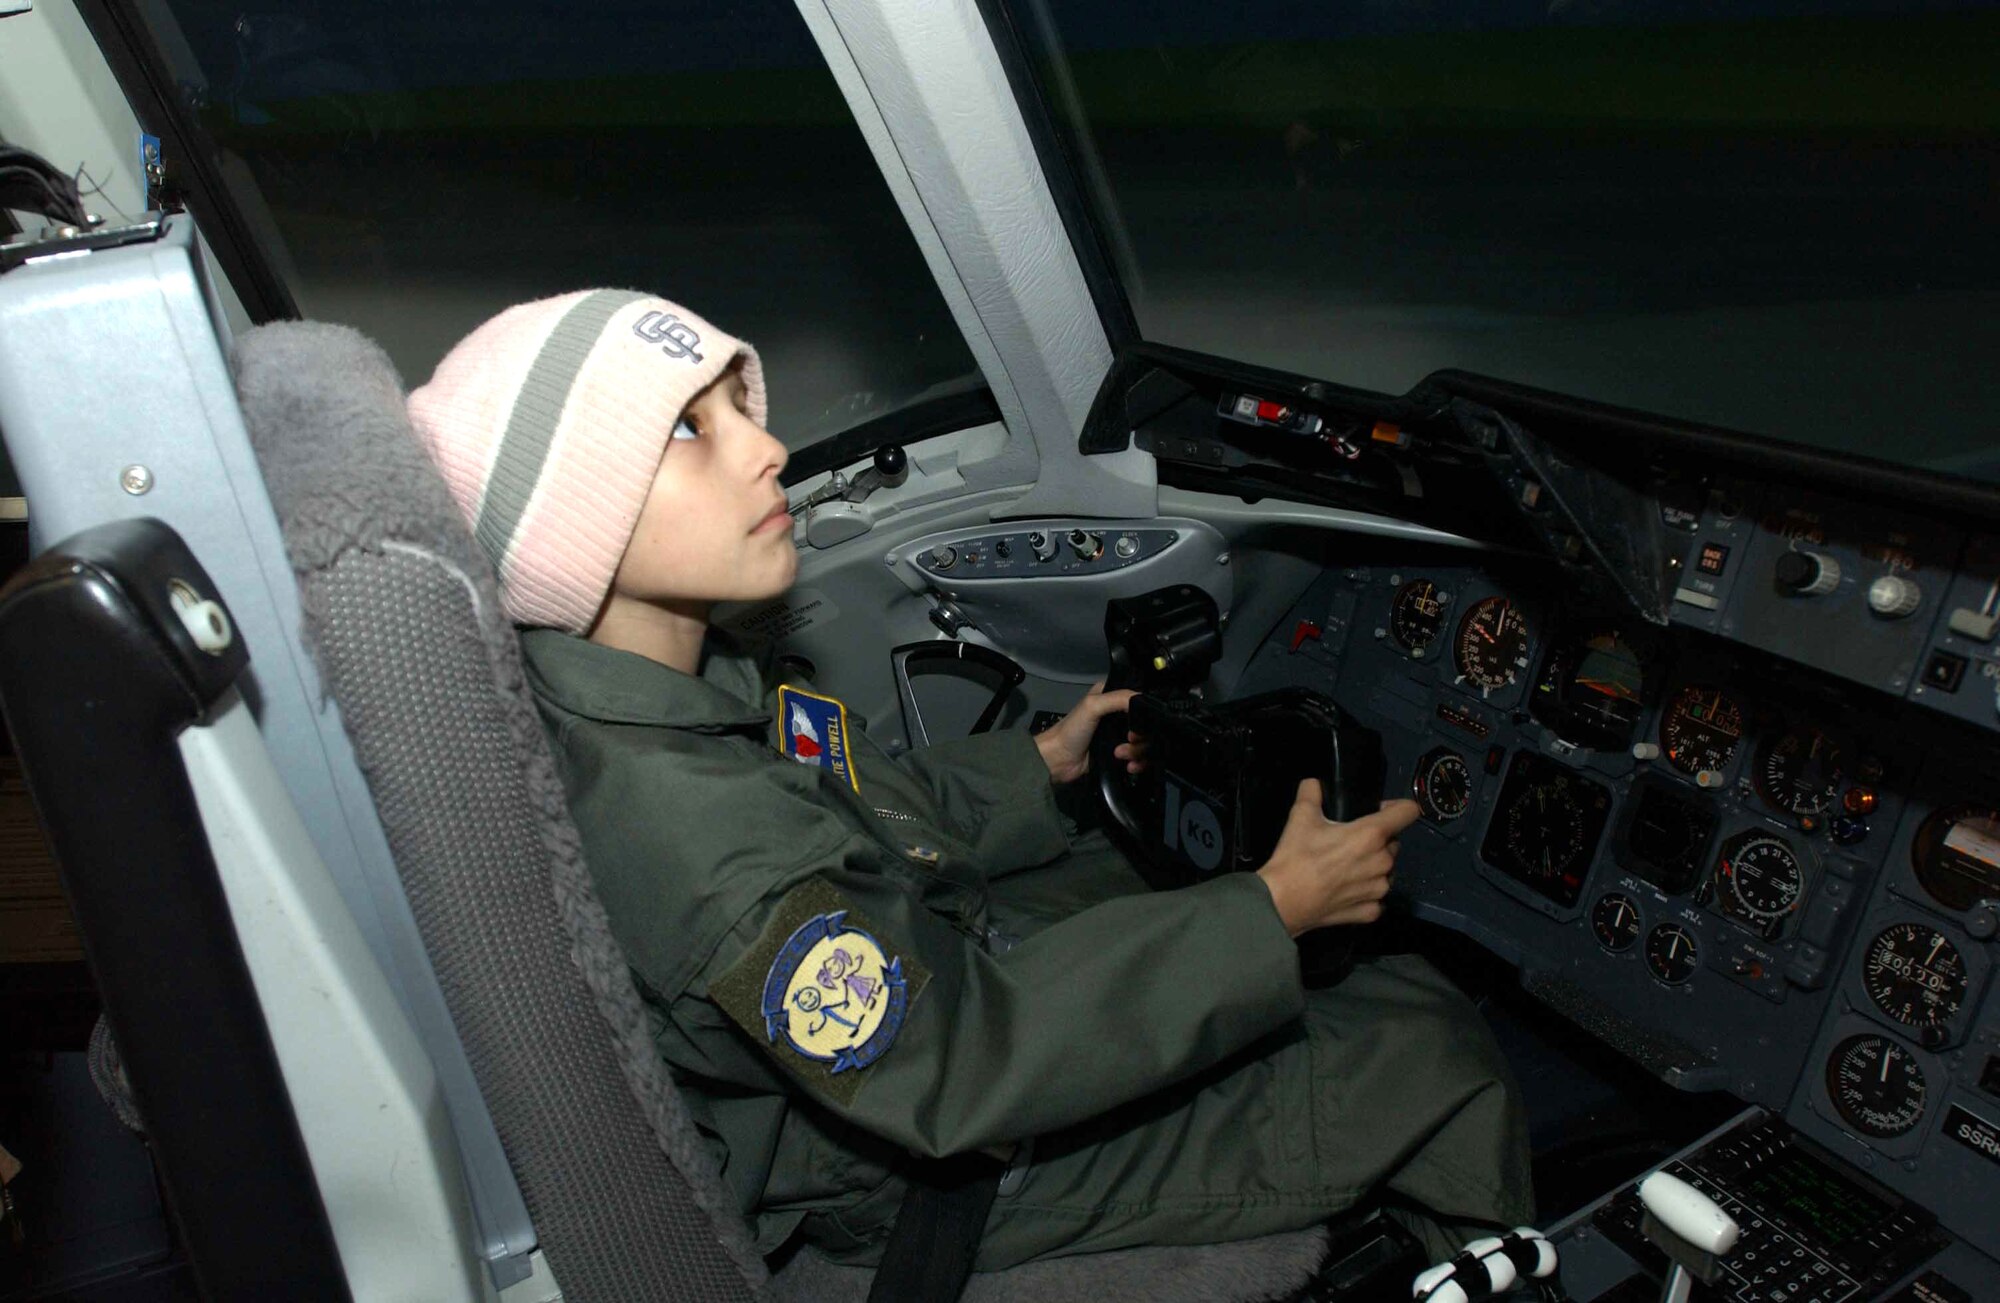 Ten-year-old Katie Powell flies a KC-10 Extender simulator at Travis Air Force Base, Calif., as part of the Pilot for a Day program on Friday, May 19, 2006. The program provides wish-fulfillment opportunities to local children with life-threatening diseases. Katie is fighting Ewing’s Sarcoma, a rare bone cancer. She is the daughter of Senior Master Sgt. Chris Powell, 60th Operations Group. (U.S. Air Force photo/Andre Mansour)
